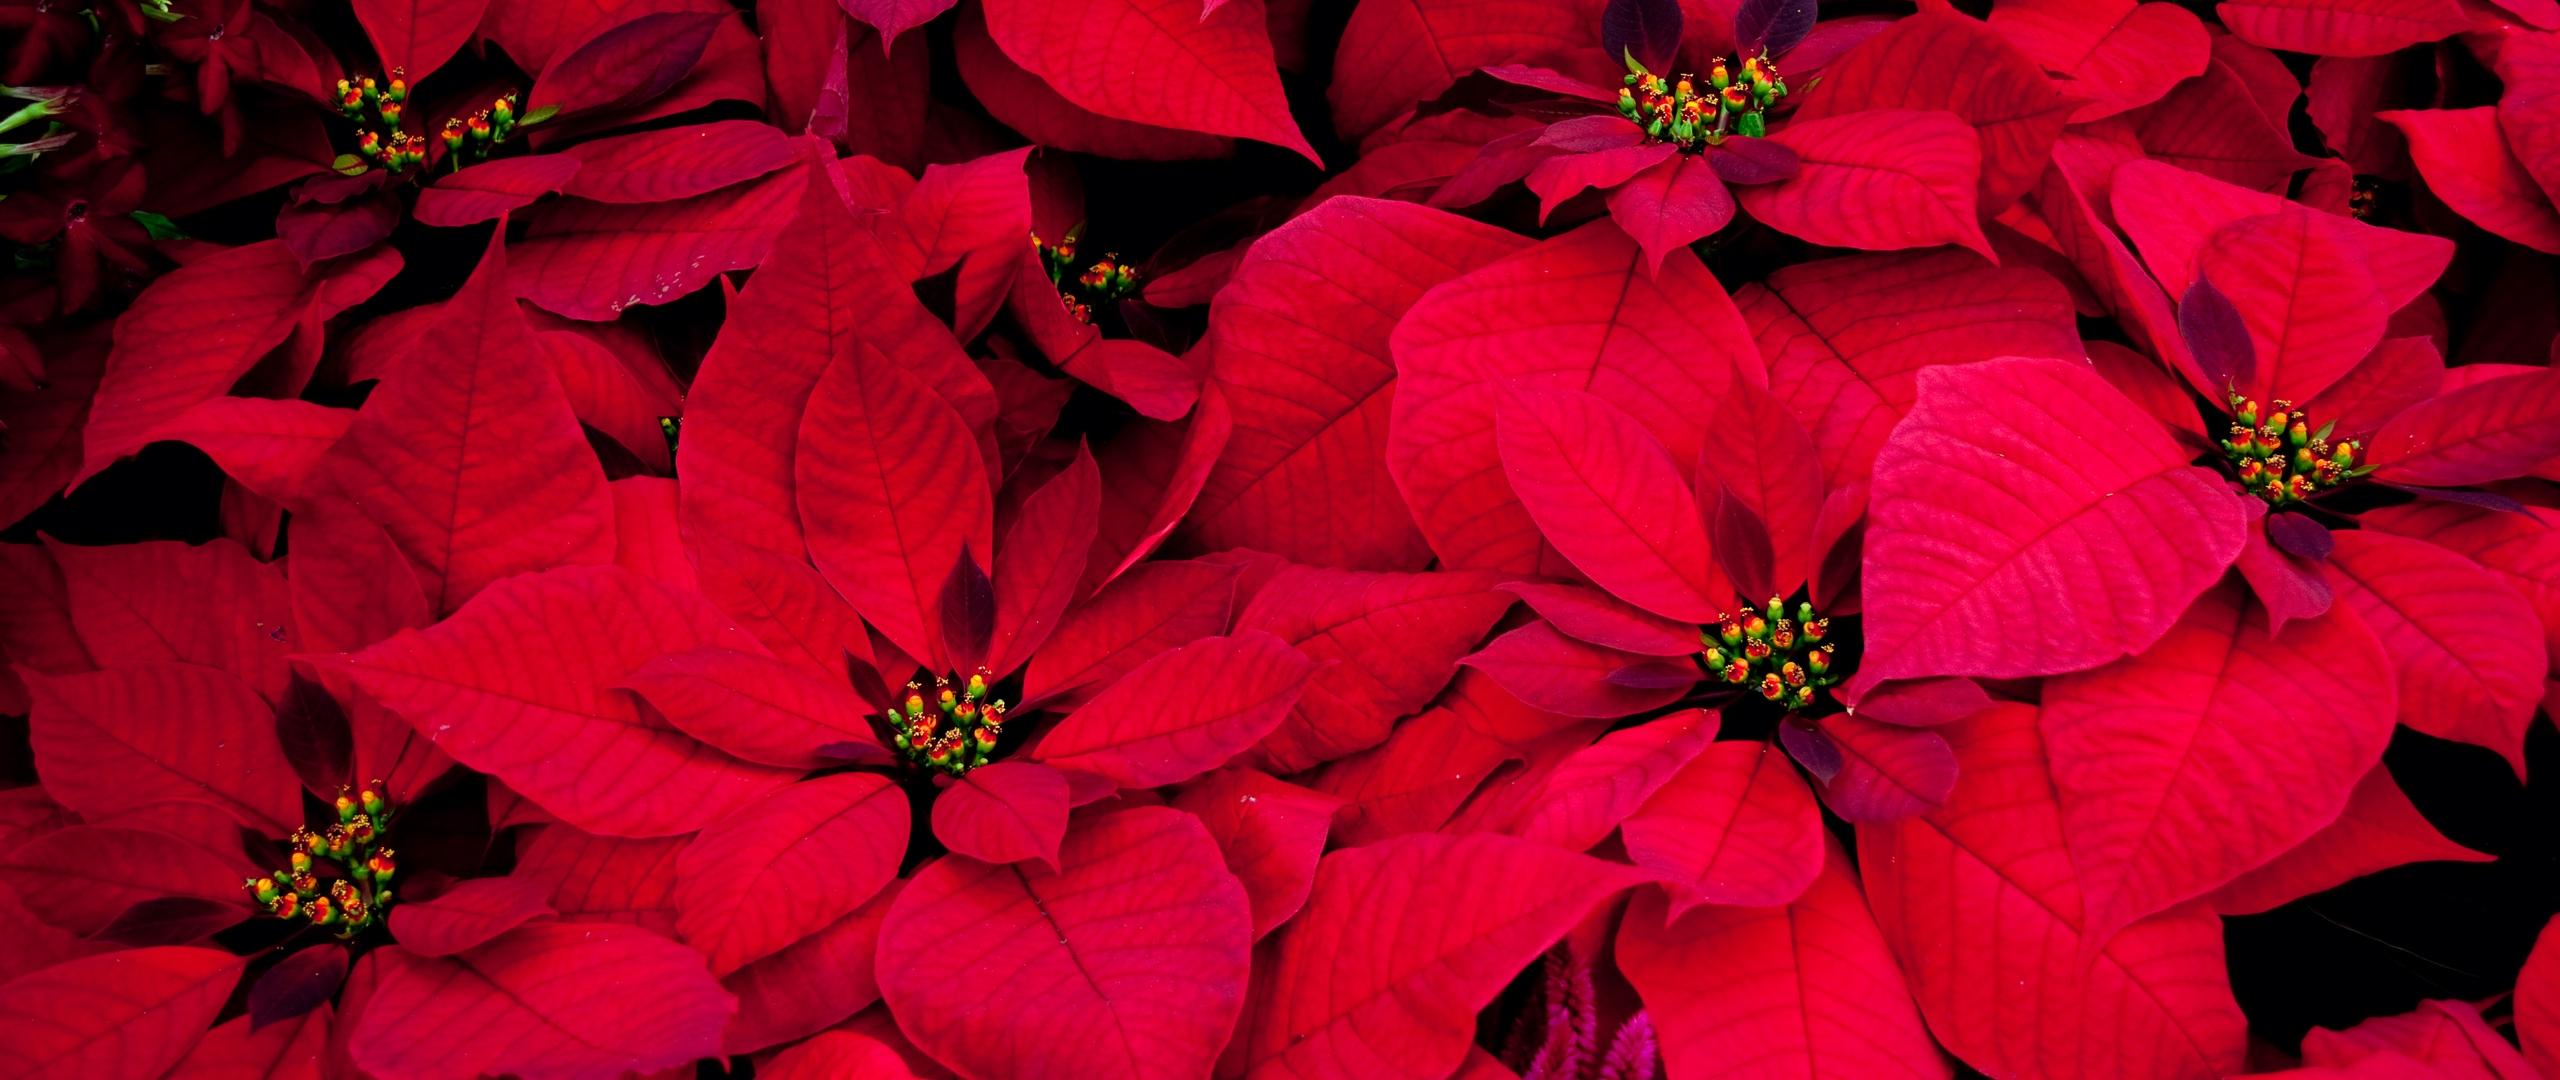 Download wallpaper 2560x1080 poinsettia, flowers, red